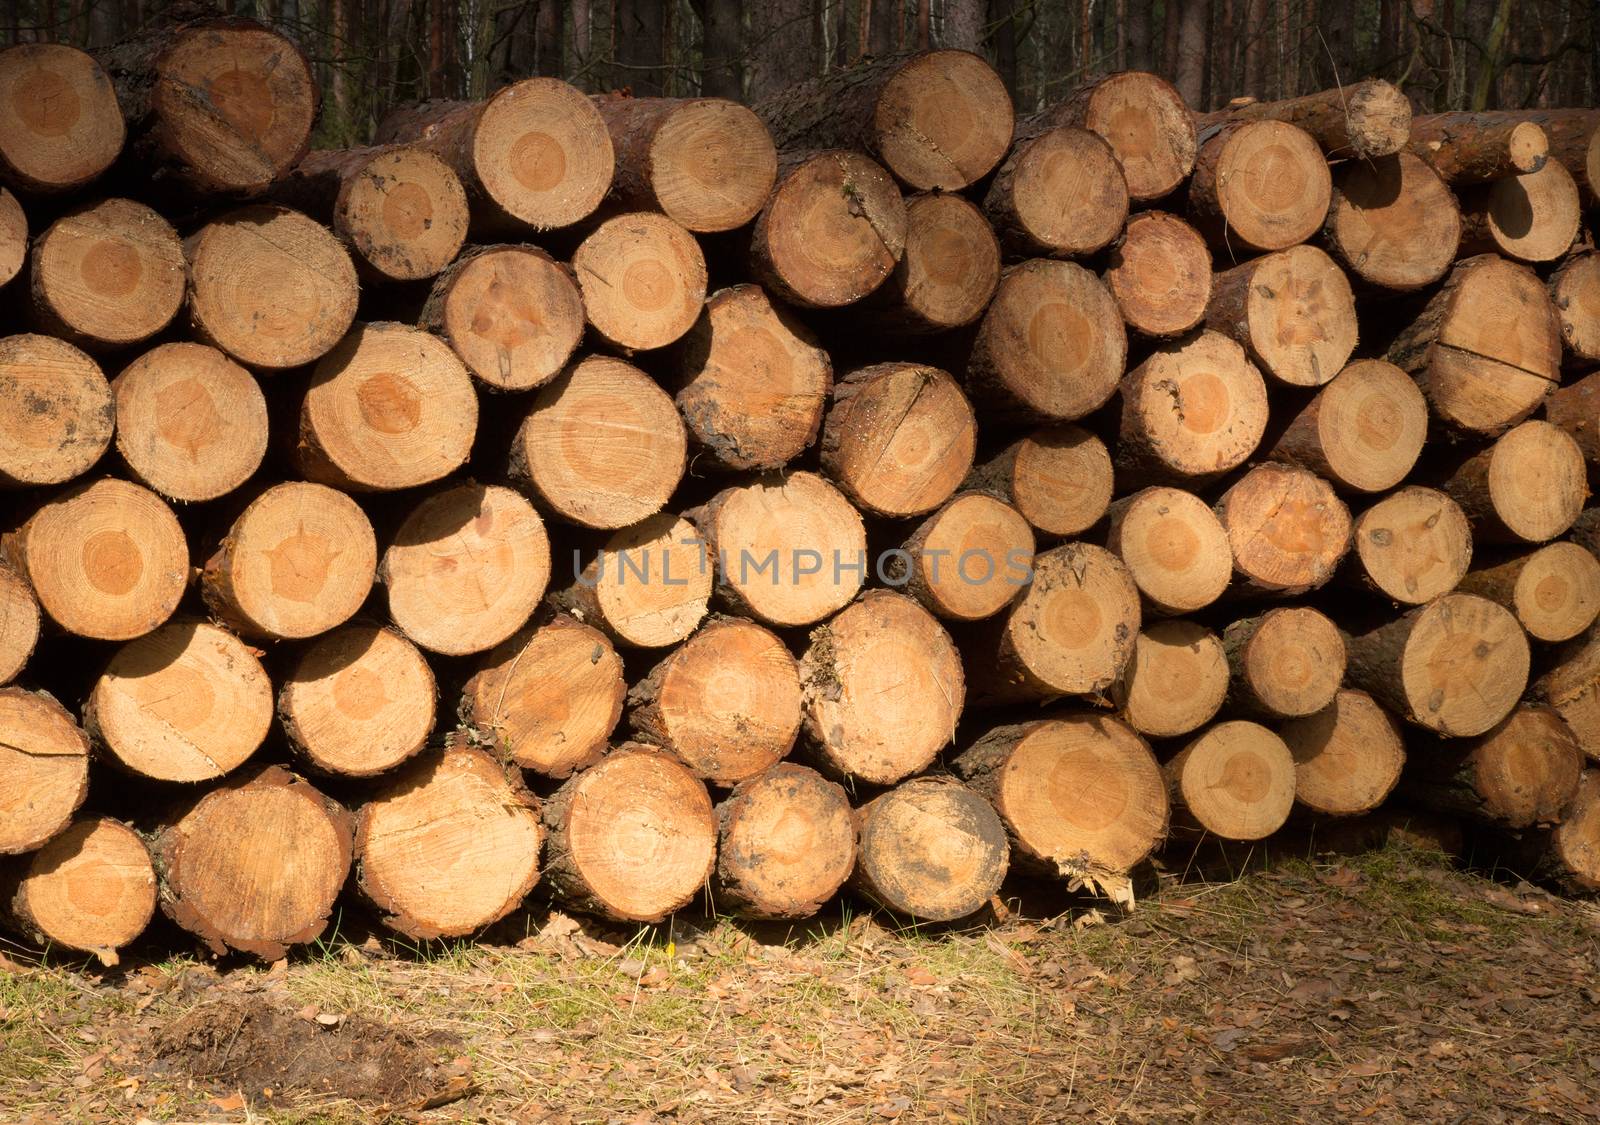 Poland, Kampinos National Park,Cut and stacked pine trunks
Horizontal view.